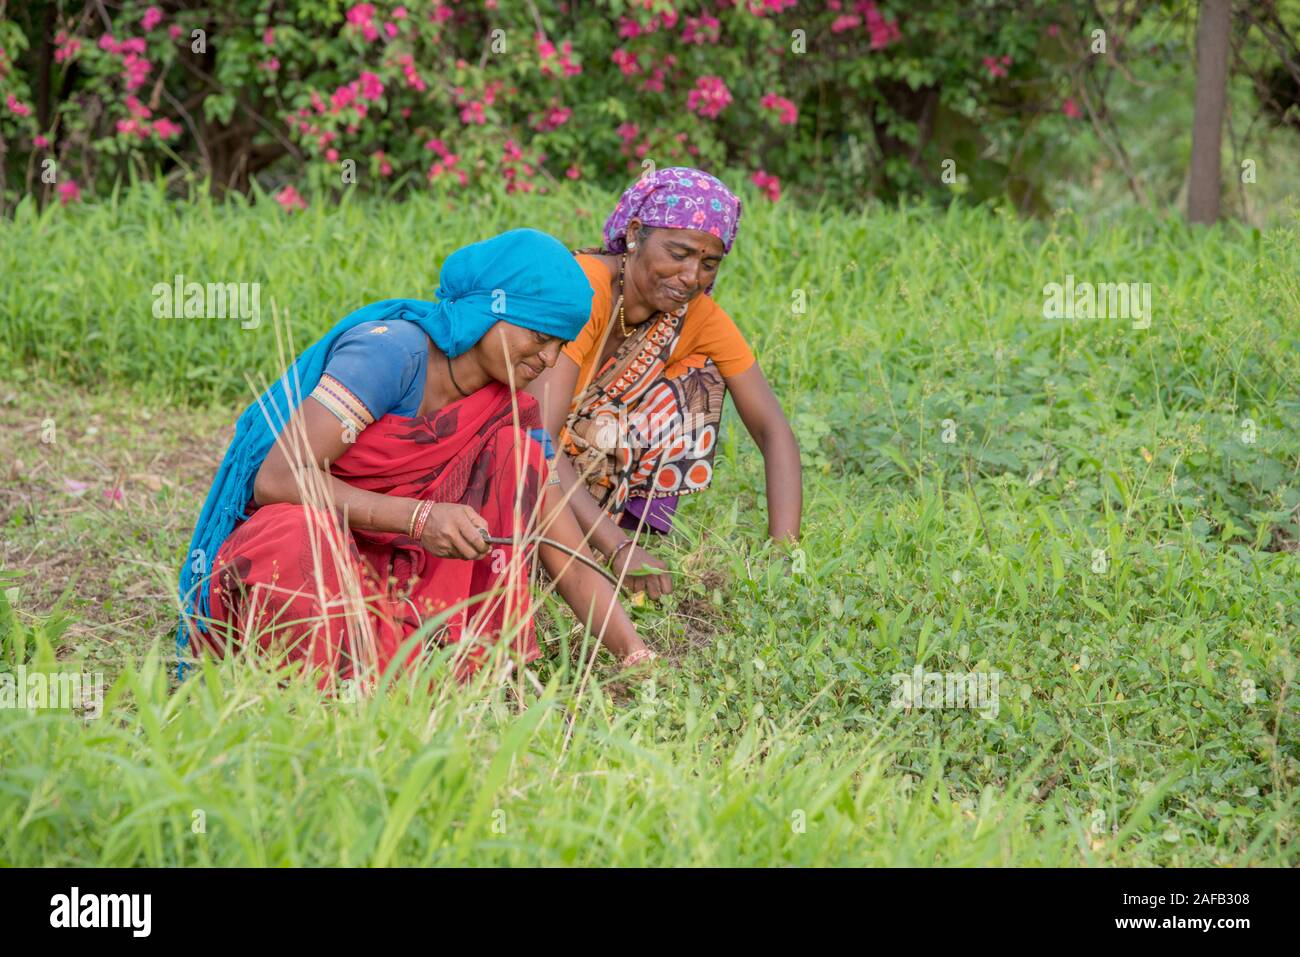 AMRAVATI, MAHARASHTRA, INDIA, JULY - 5, 2017: Unidentified woman worker working in the field, Gardening scene at park, woman worker cutting unwanted g Stock Photo